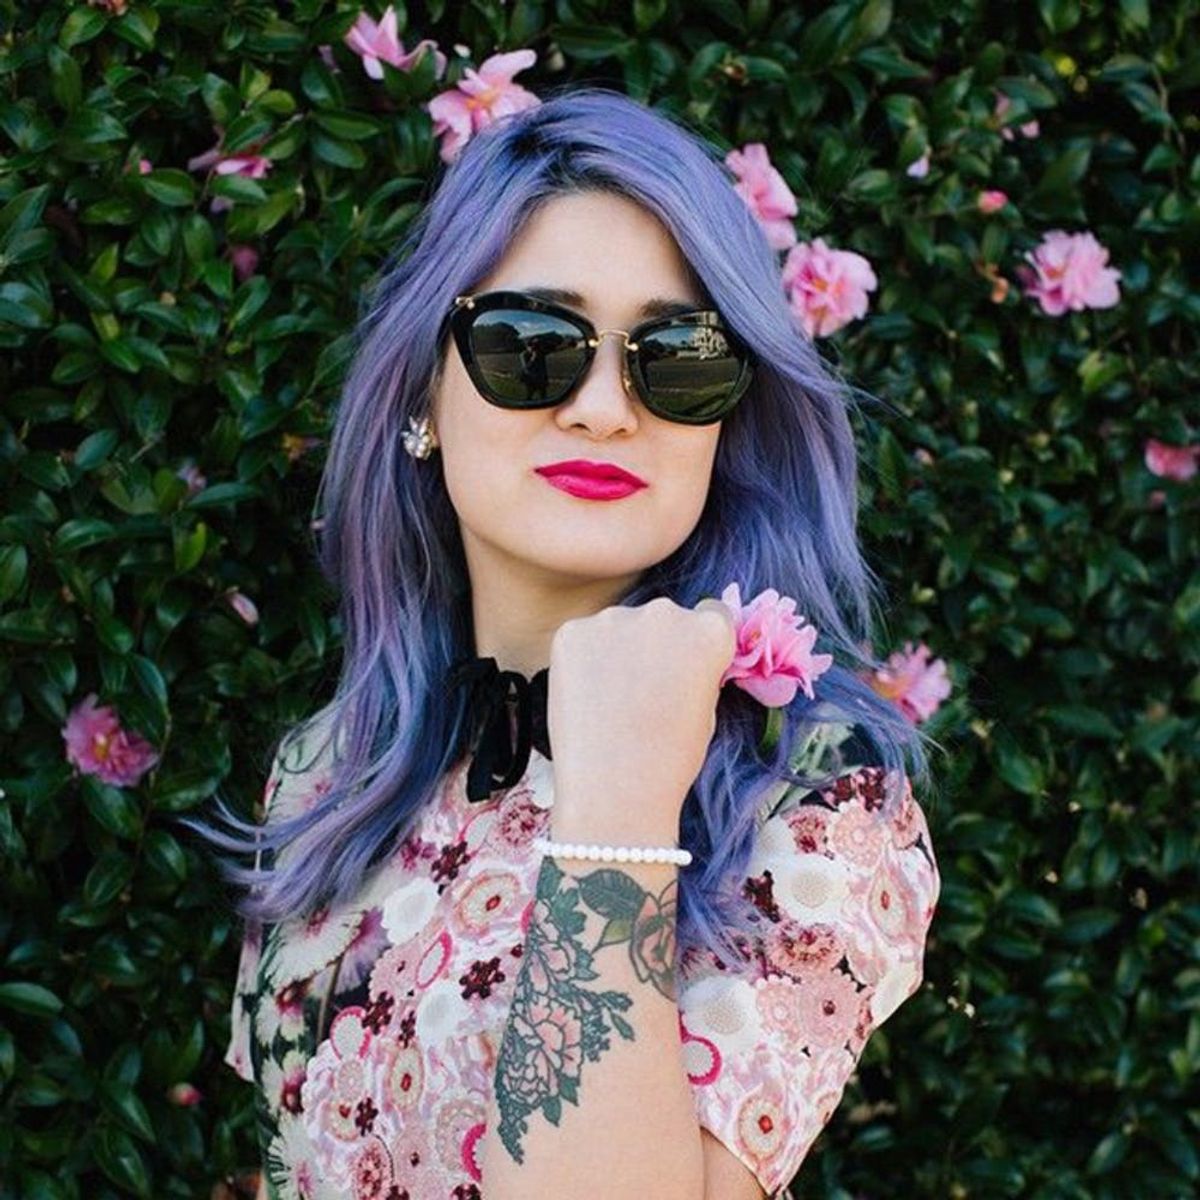 12 Ways to Change Up Your Hair Using Pantone Colors of the Year